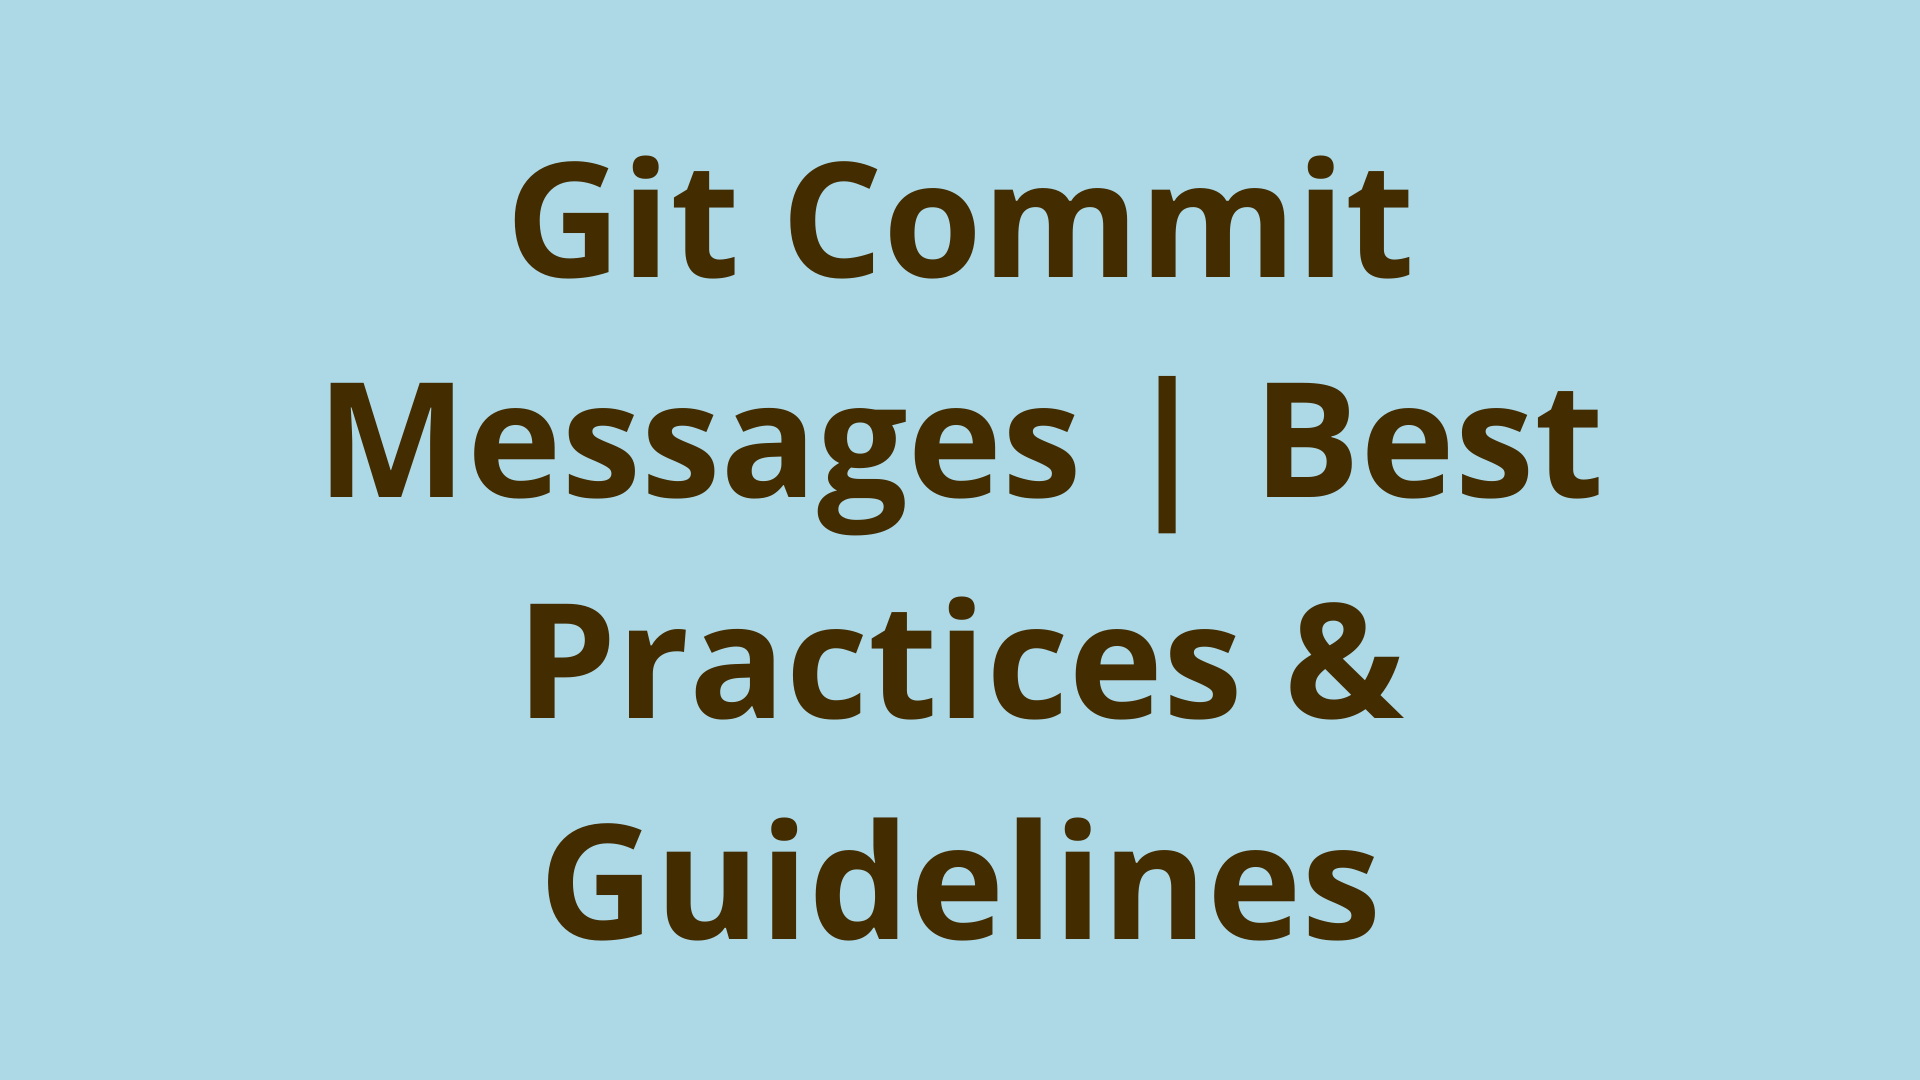 Image of Git Commit Messages: Best Practices & Guidelines